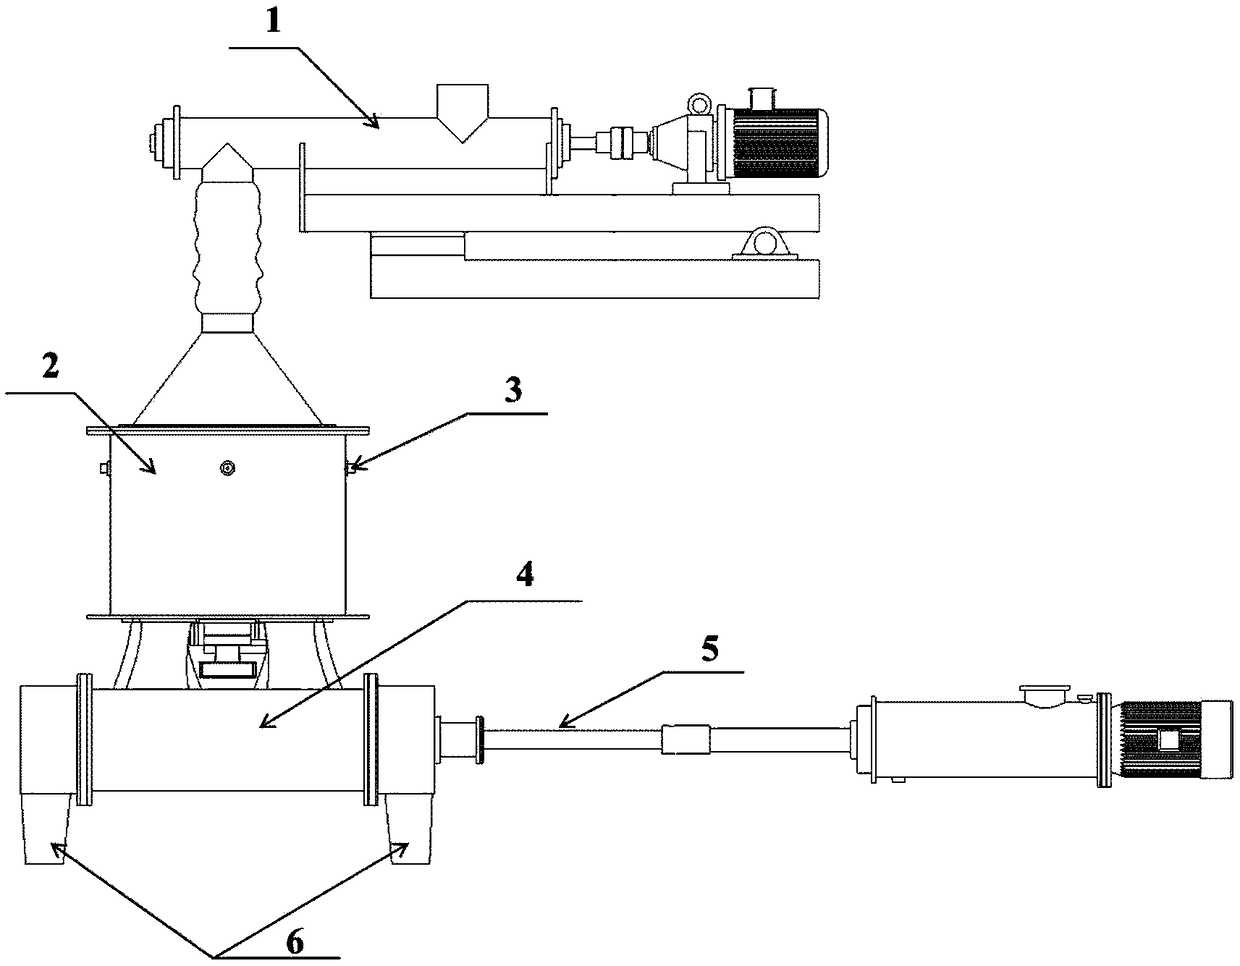 A method for pretreatment of waste incineration fly ash before melting